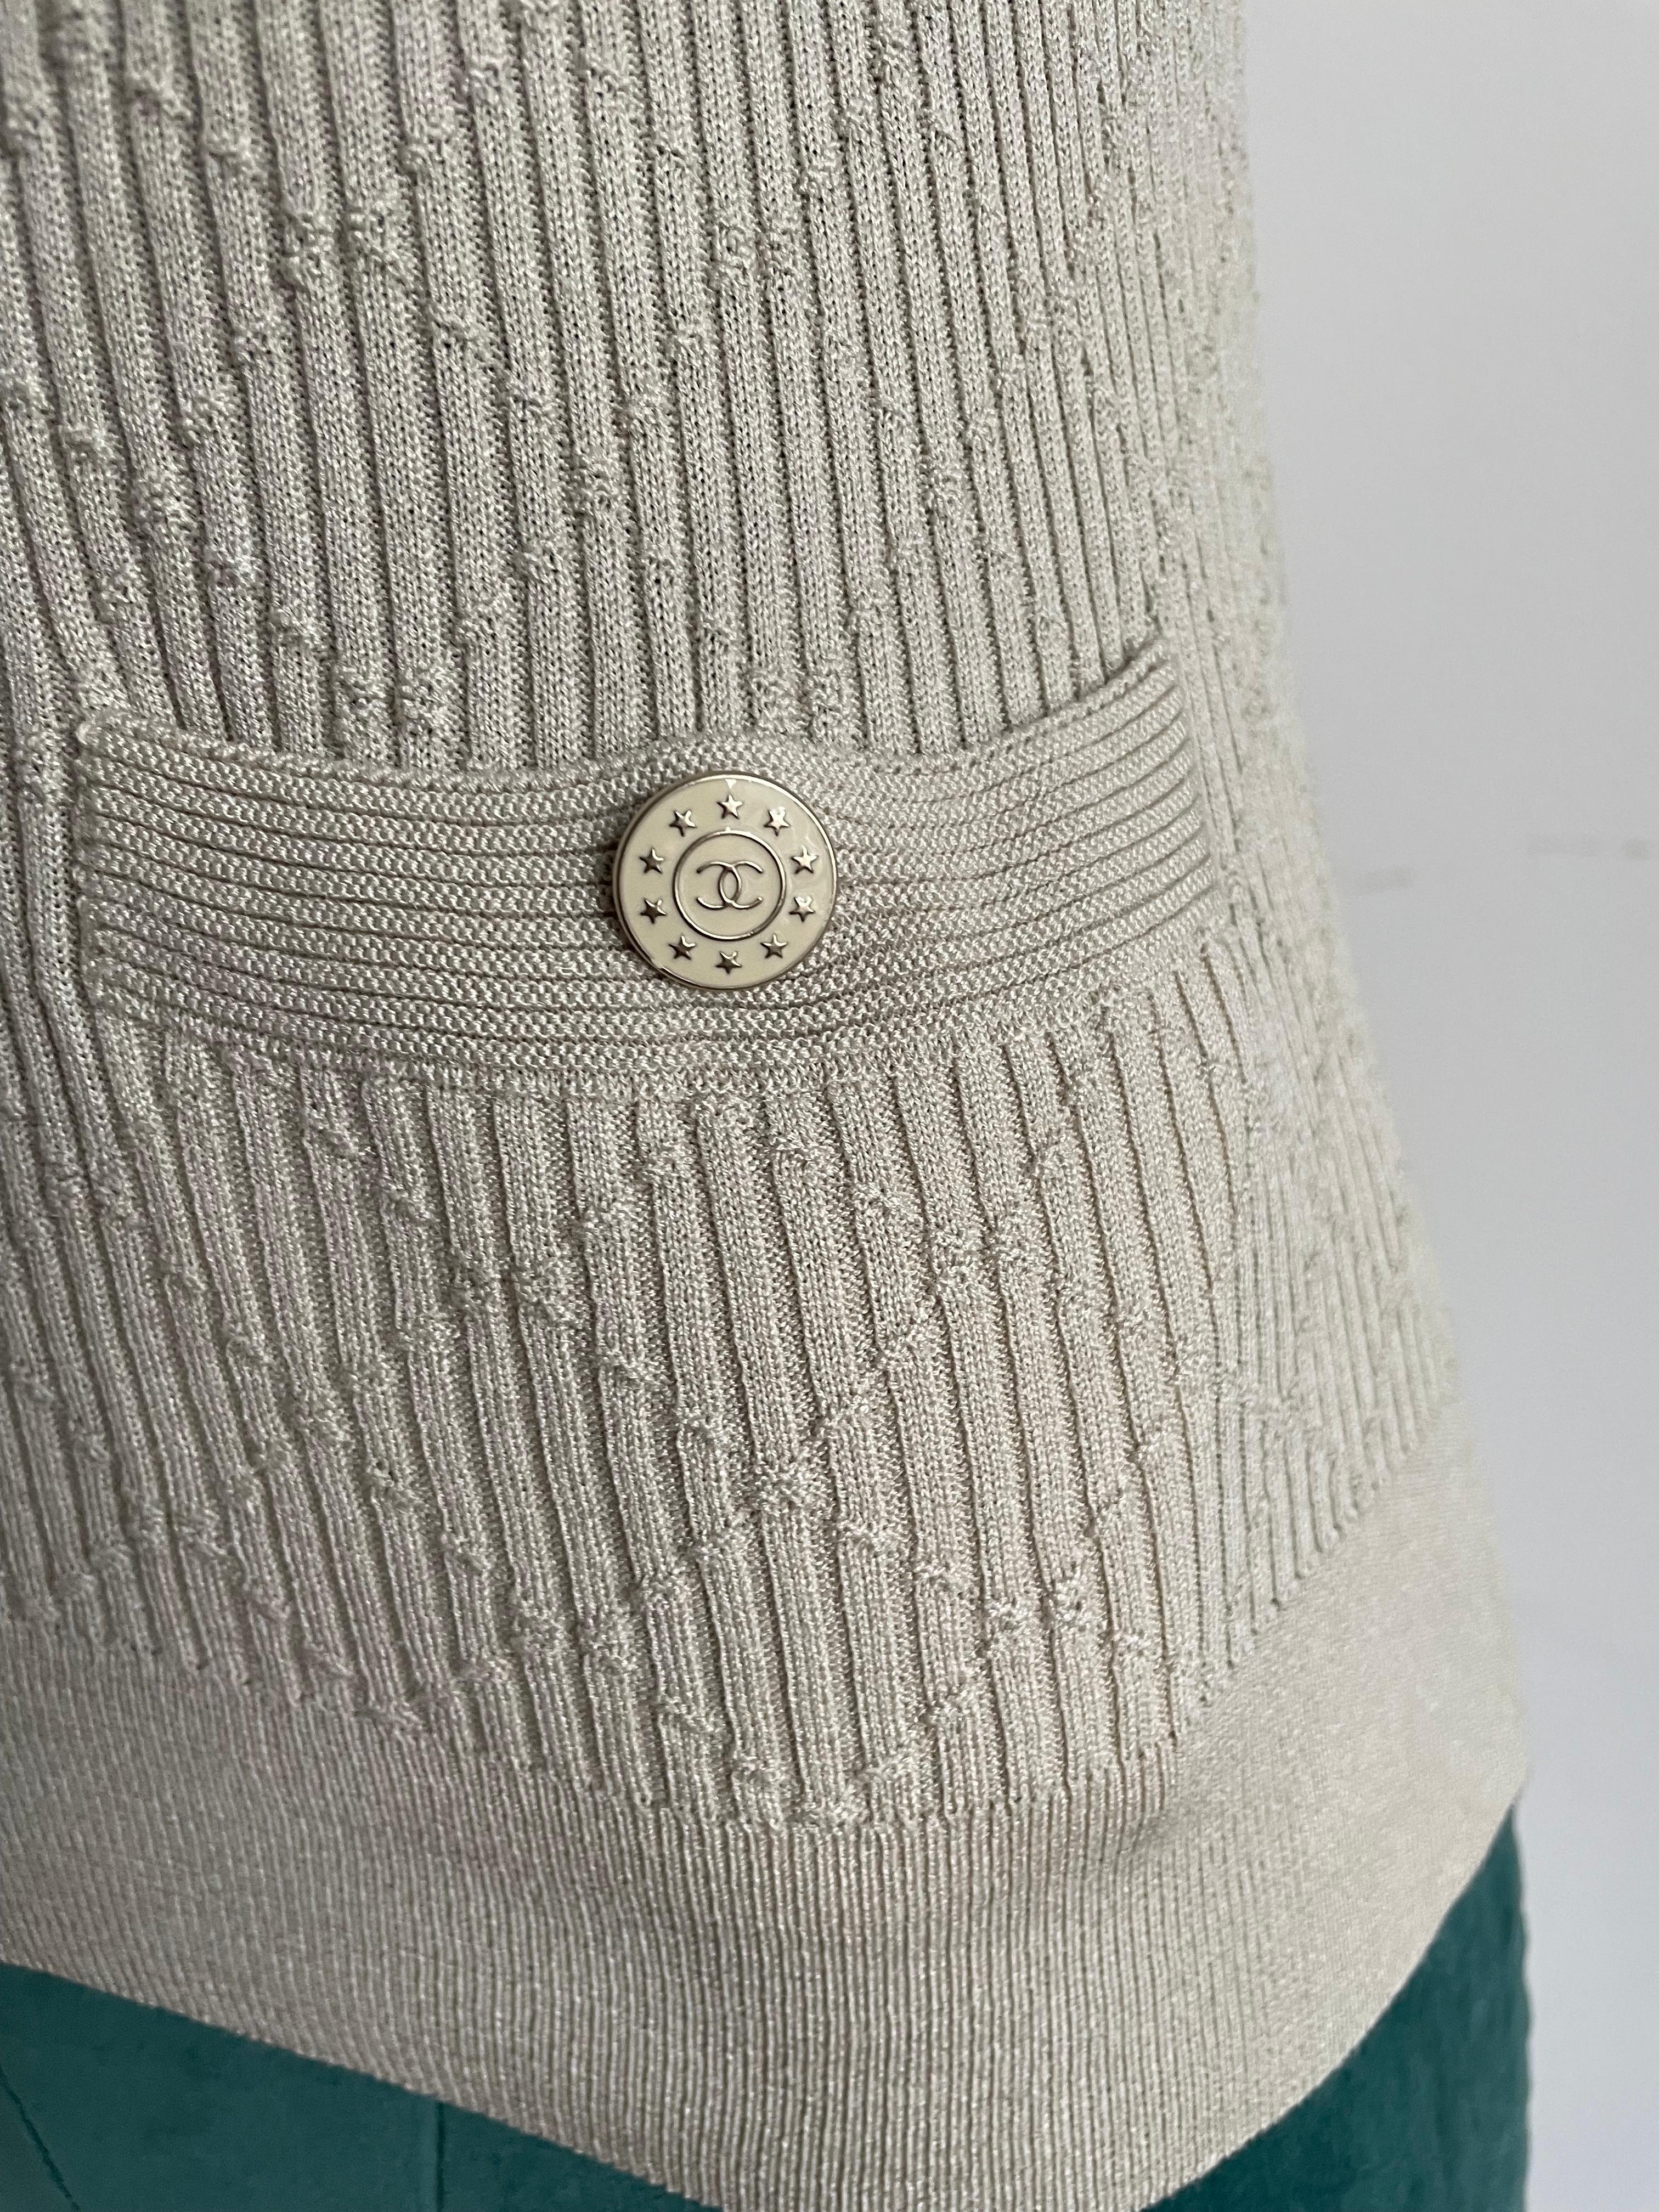 Chanel Khaki Color stretchy Knit Tip  In Excellent Condition For Sale In Toronto, CA